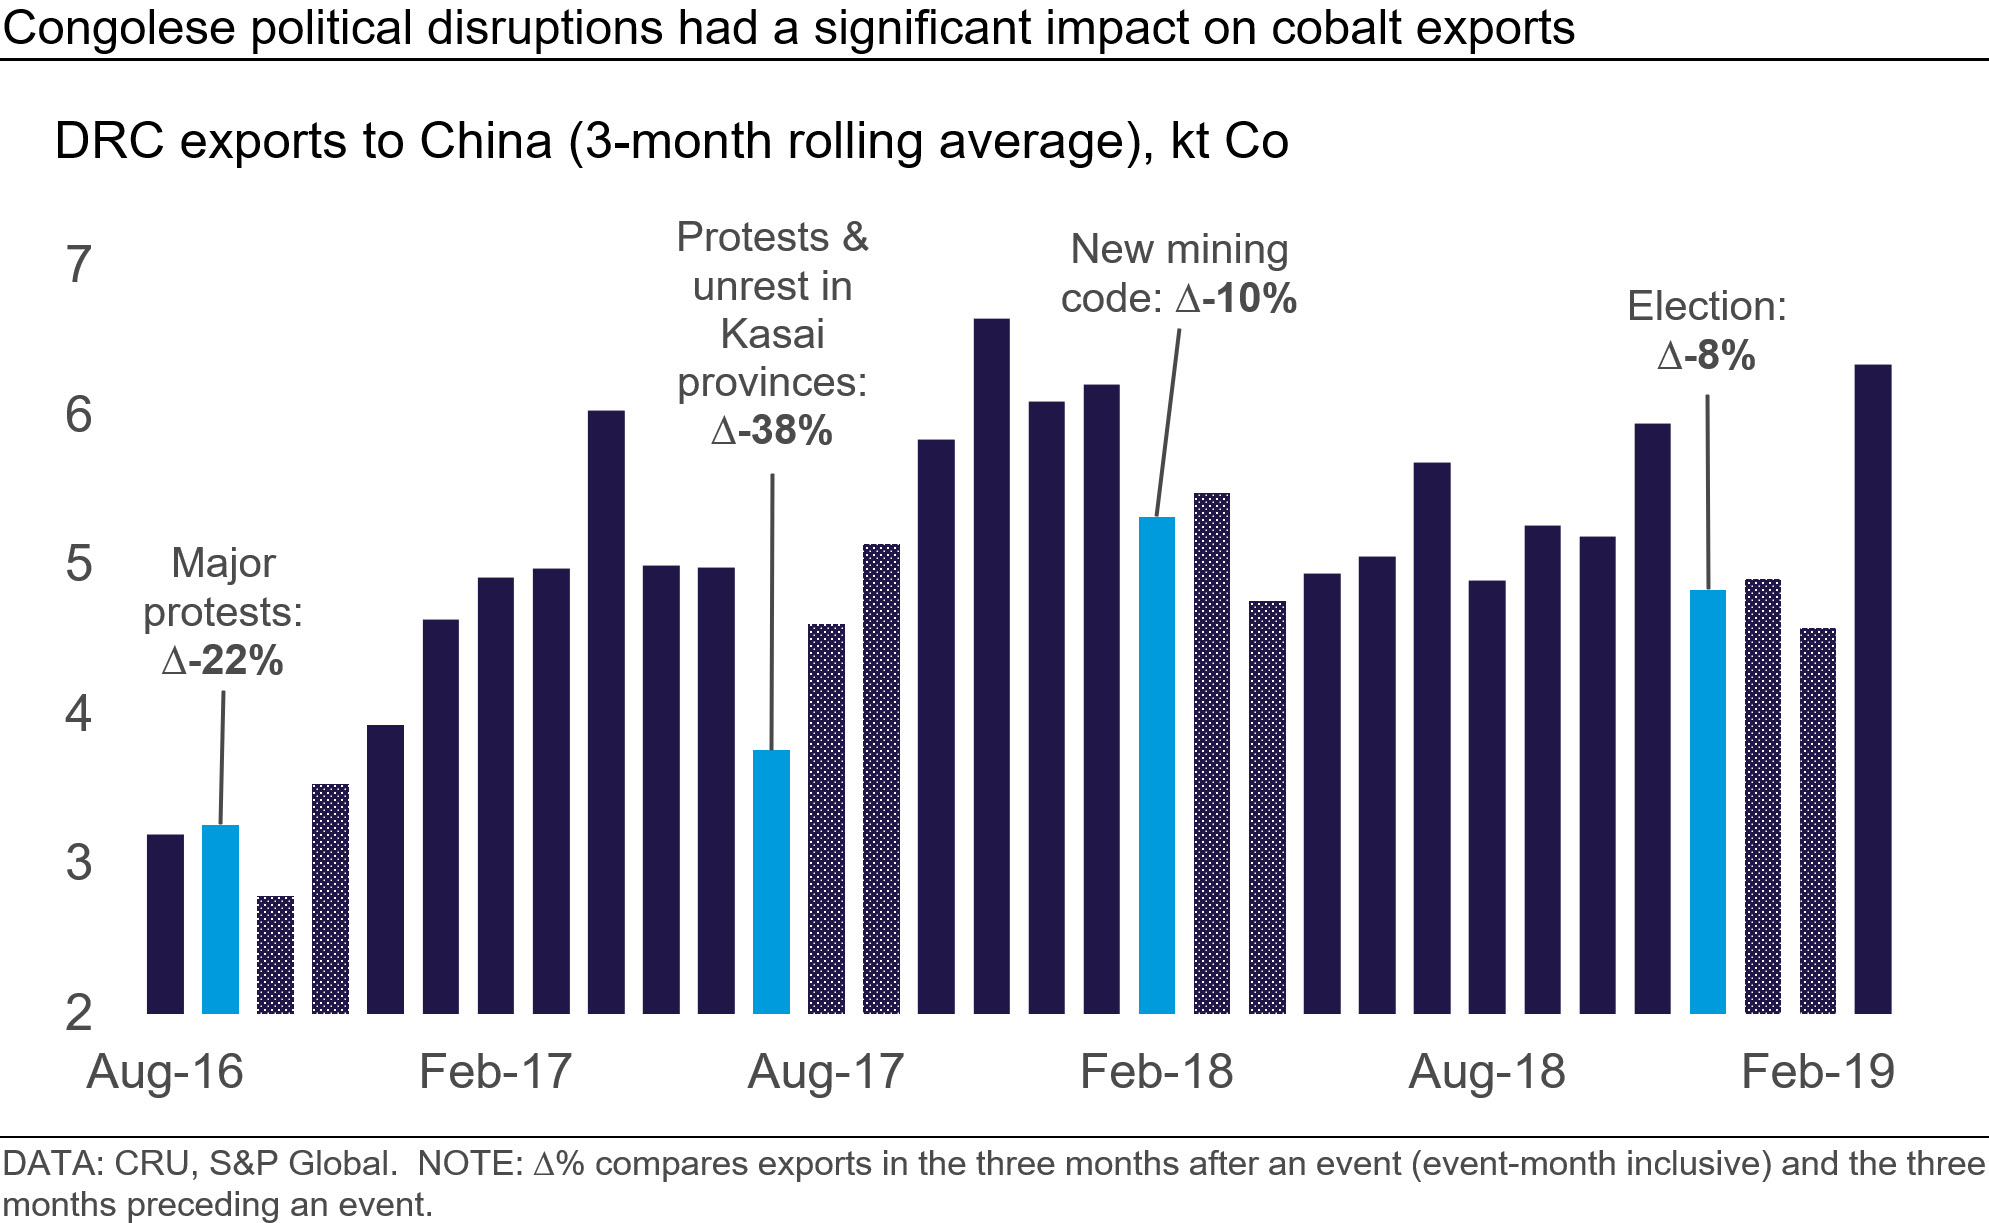 Graph showing that Congolese political disruptions had a significant impact on cobalt exports